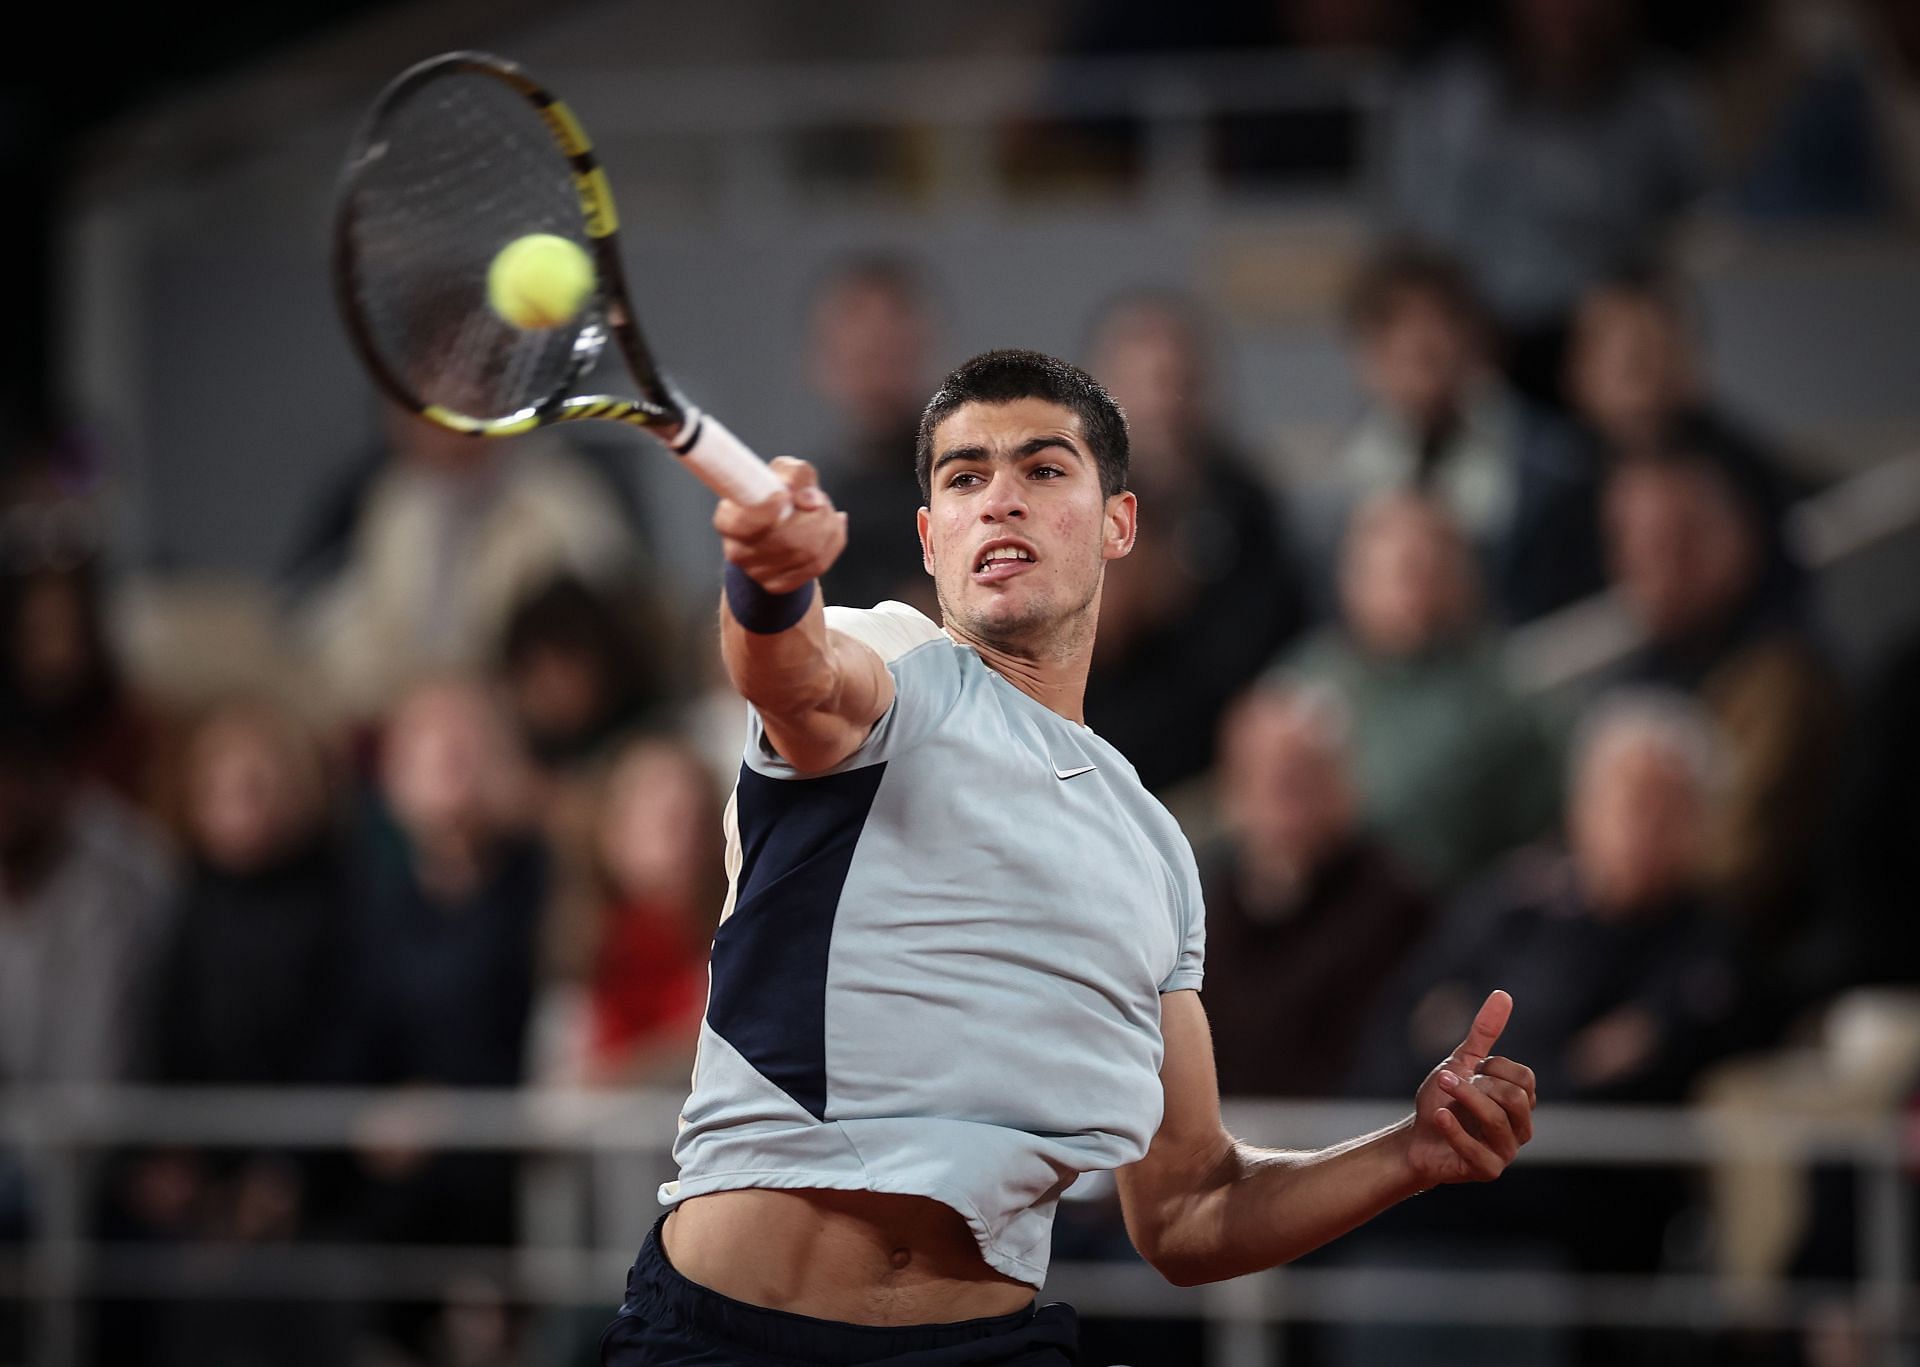 Carlos Alcaraz is one of the favorites to win the French Open